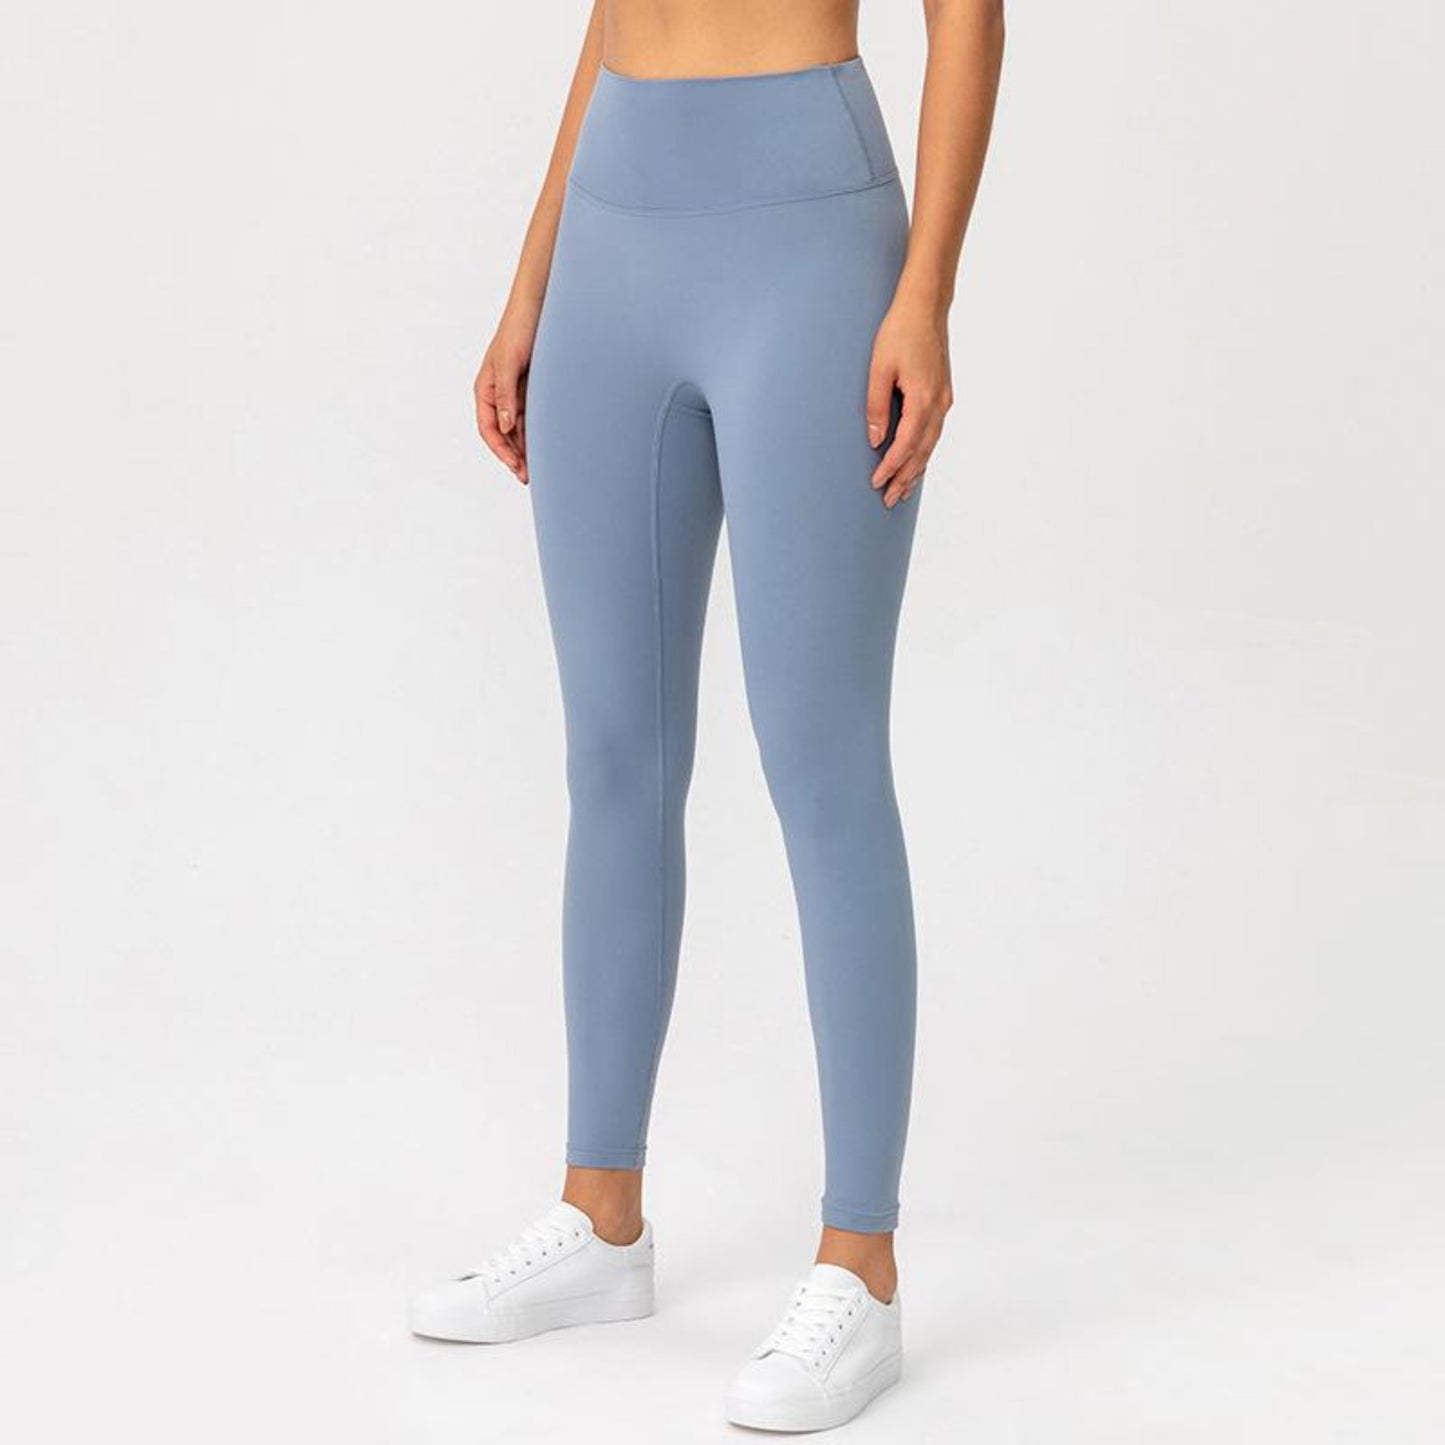 AZURE BLUE, HIGH RISE AND SQUAT PROOF LEGGINGS WORN BY MODEL ON A WHITE BACKGROUND